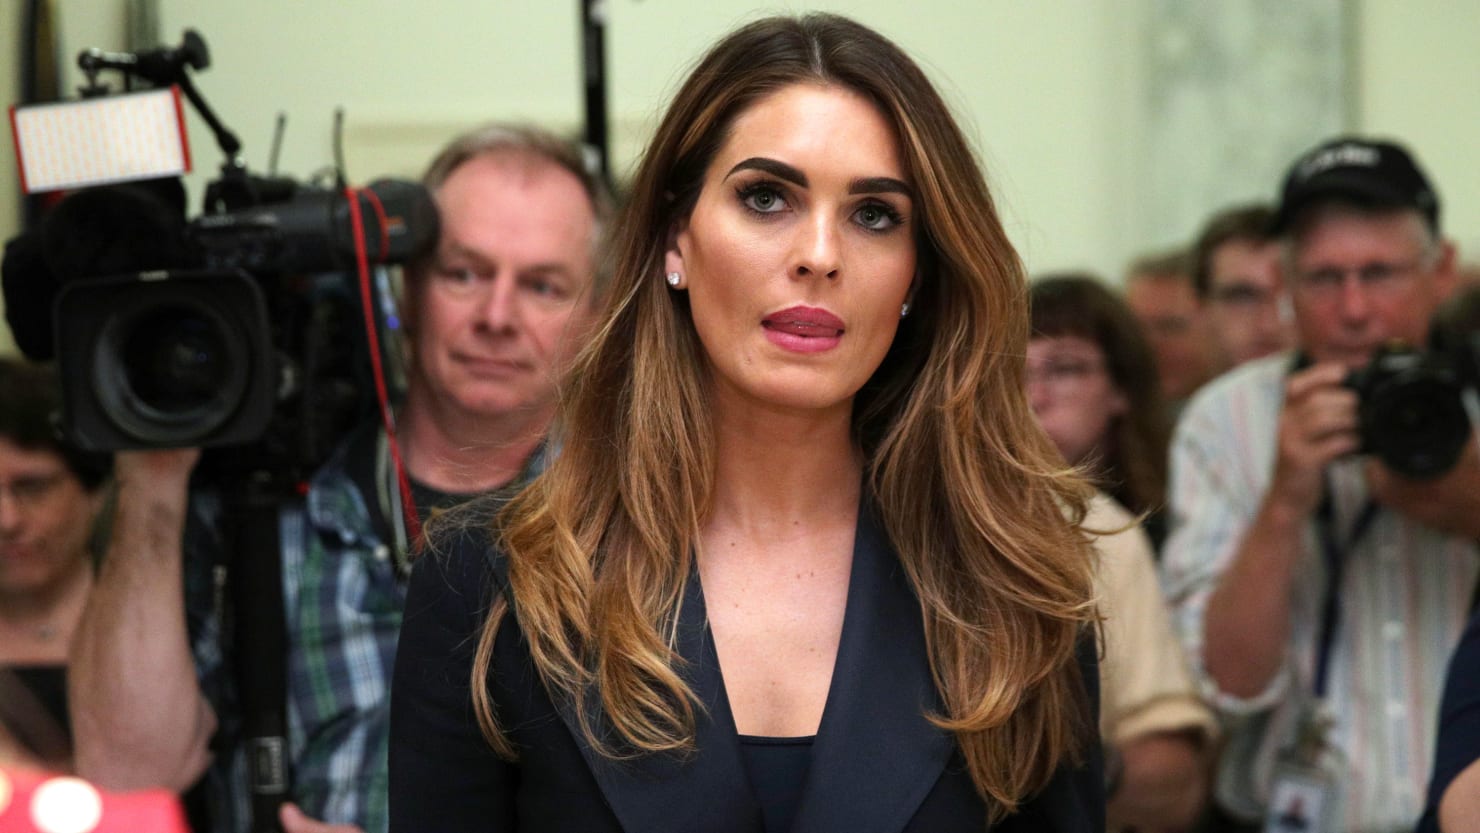 Hope Hicks, Who Saw Everything and Said Nothing, Just Exposed Trump